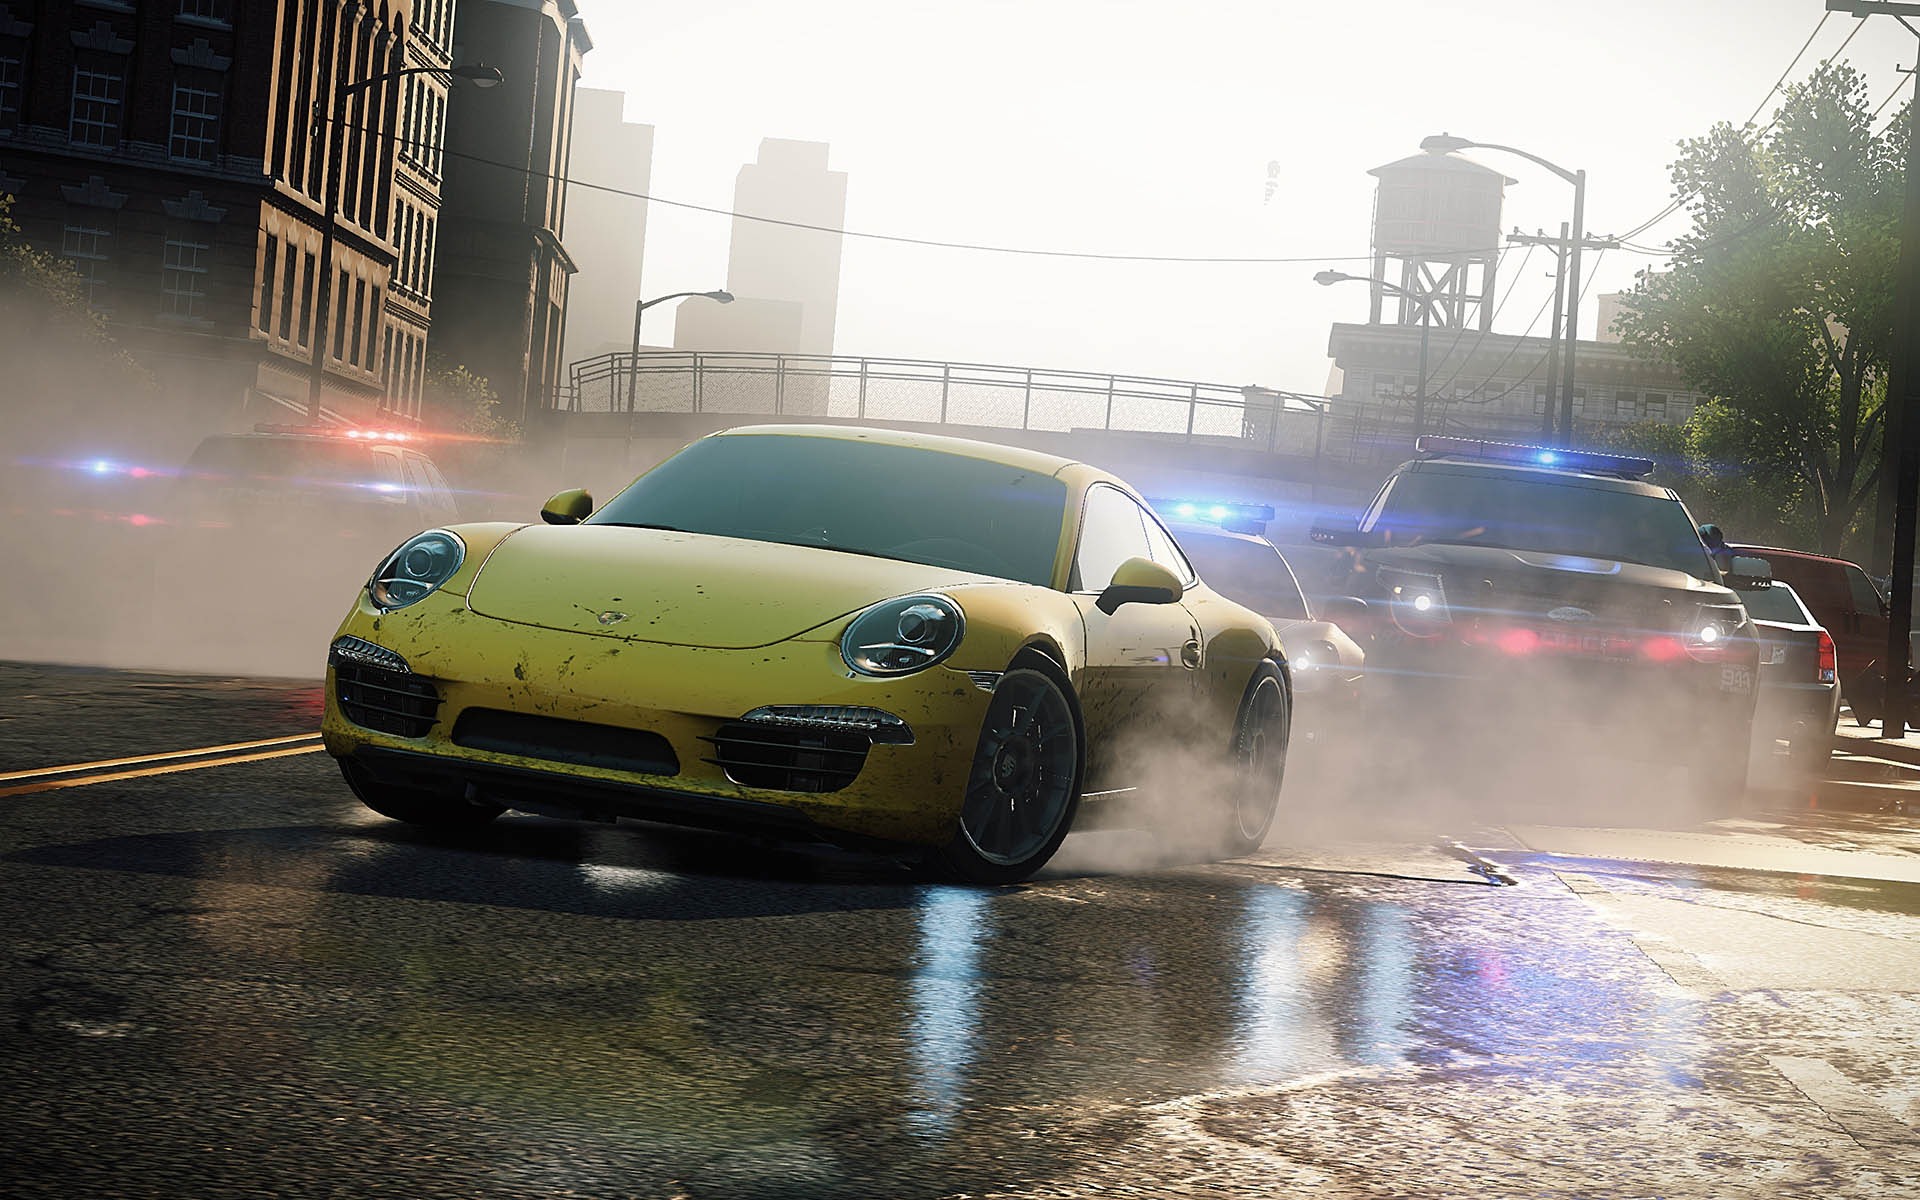 Need for Speed: Most Wanted 极品飞车17：最高通缉 高清壁纸18 - 1920x1200